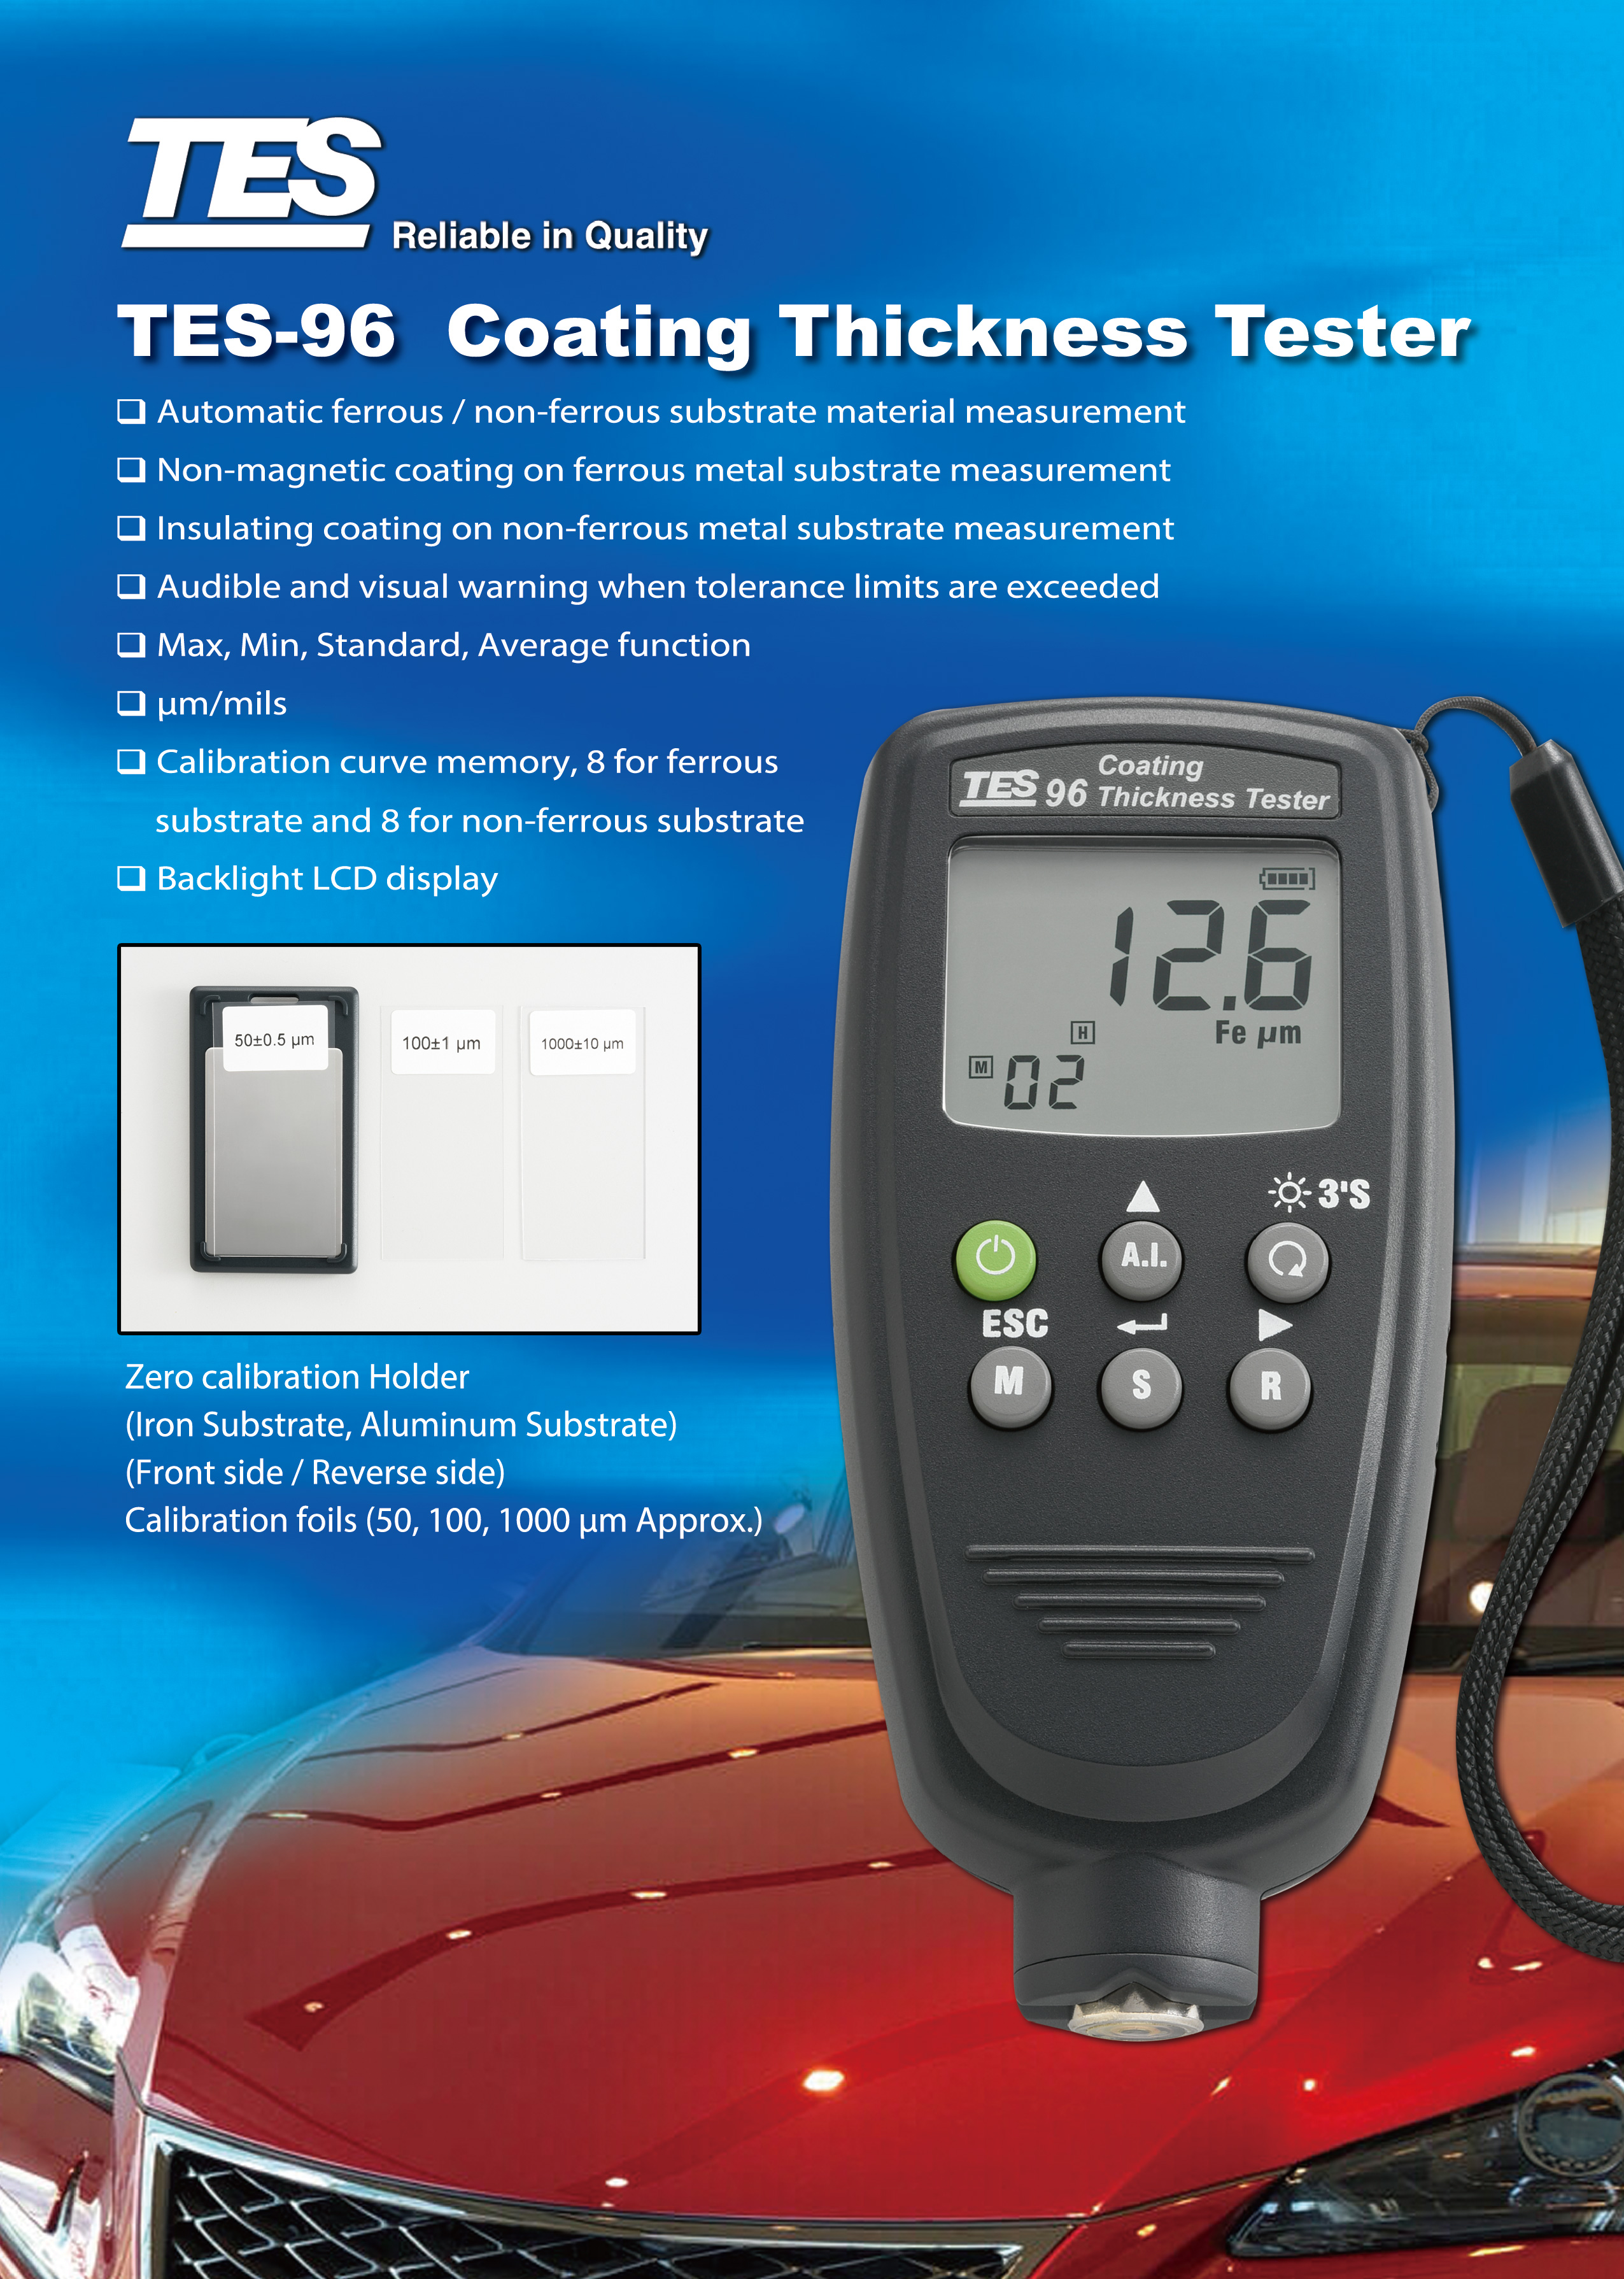 TES-96 Coating Thickness Tester